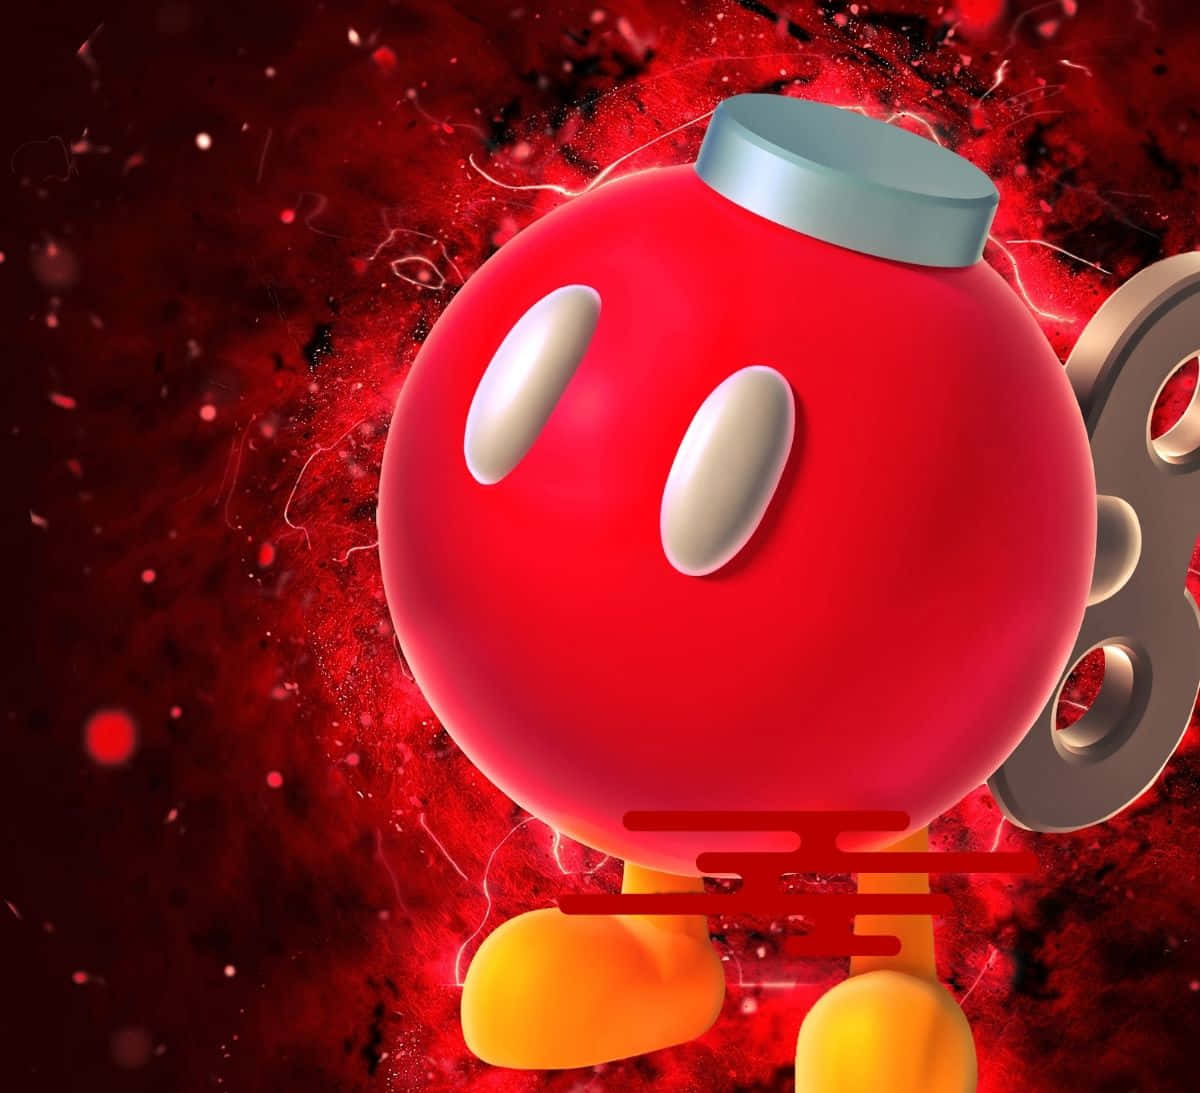 Bob-omb Explodes On Screen in a Colorful Display Wallpaper